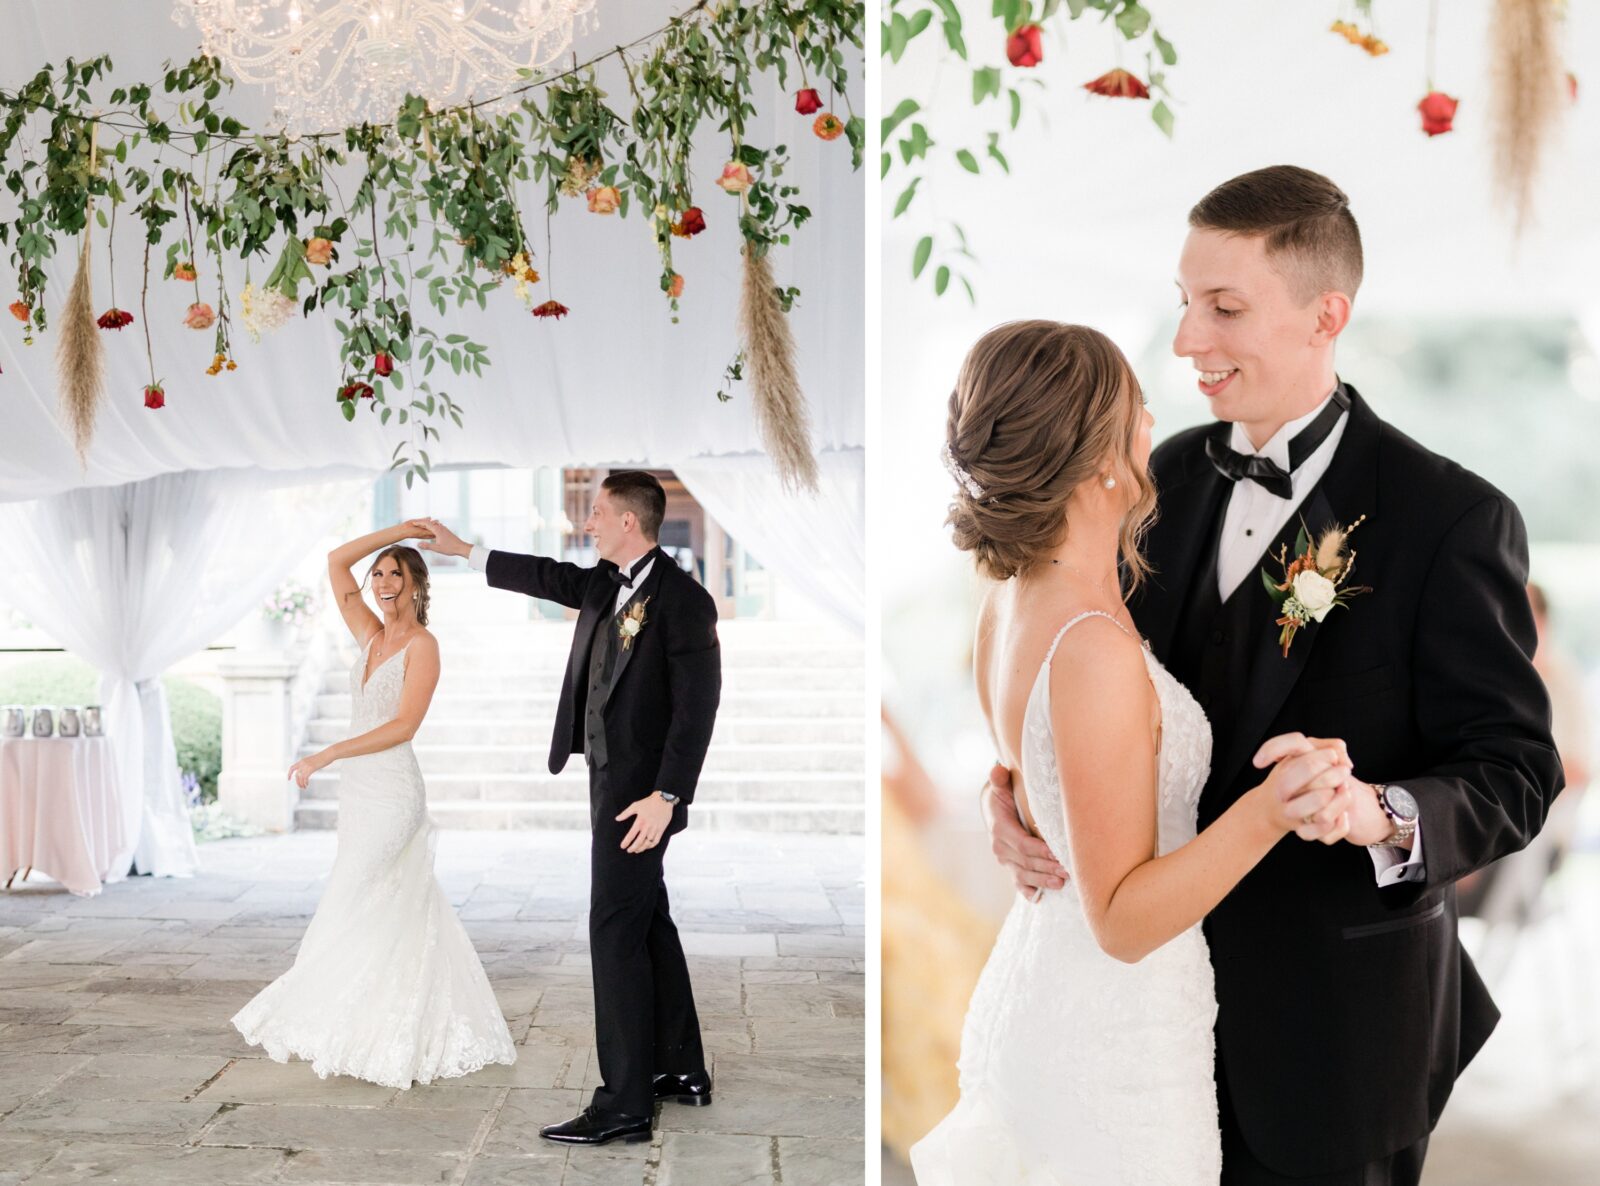 Bride and groom's first dance under the hanging flower arrangement at Box Hill Mansion